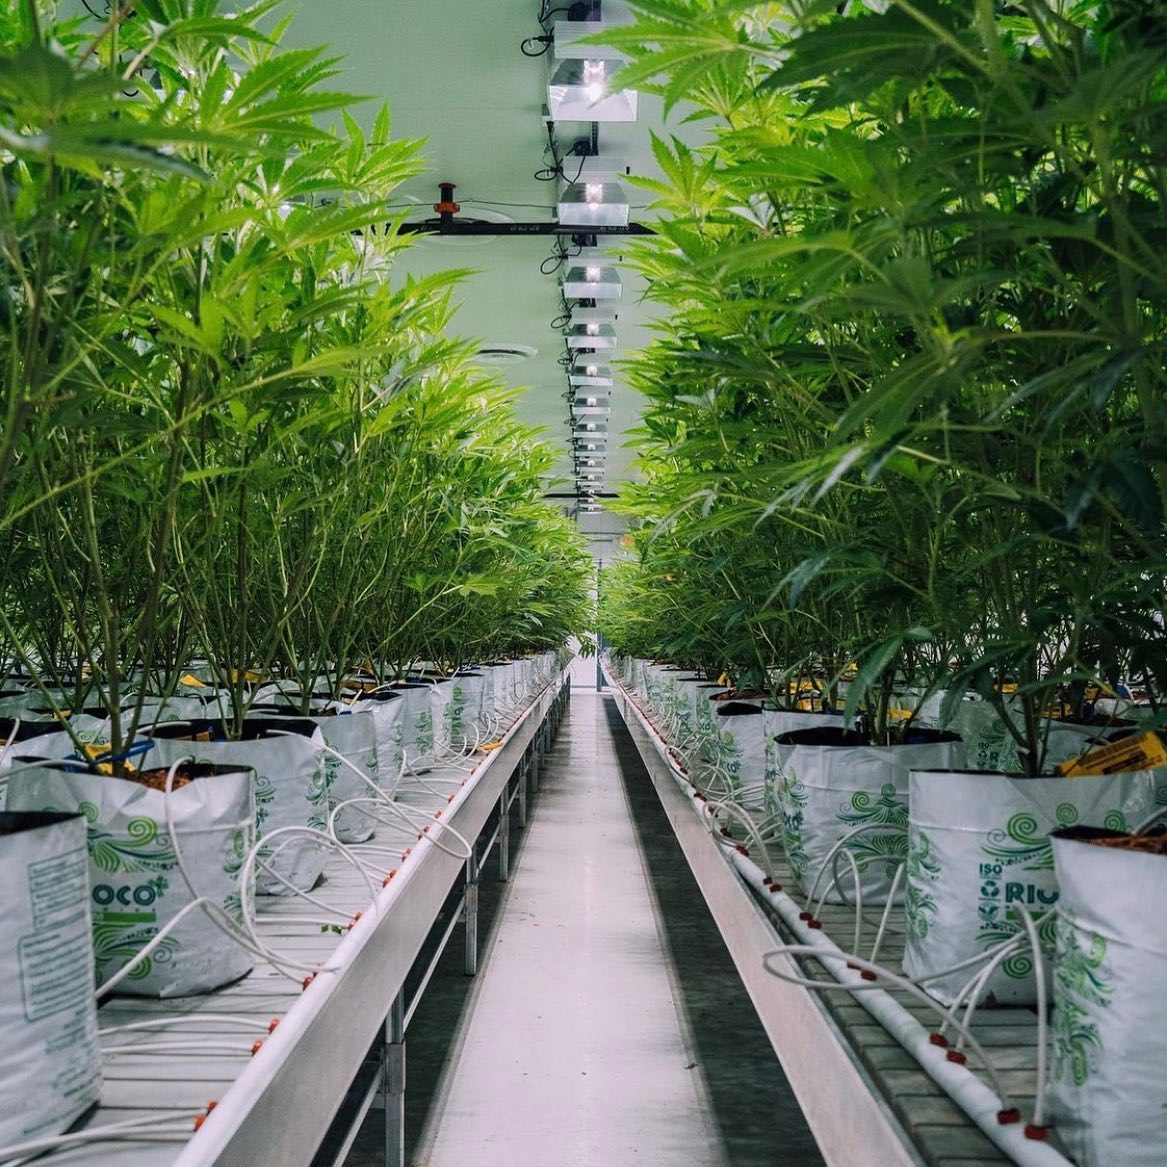 growing with coco coir RIOCOCO MMJ offer one of the best coco coir substrates for hydroponics farming, vertical farming, urban gardening, rooftop gardening, open field farming, and more. For more visit: https://www.riococo-mmj.com/ by riococommjusa